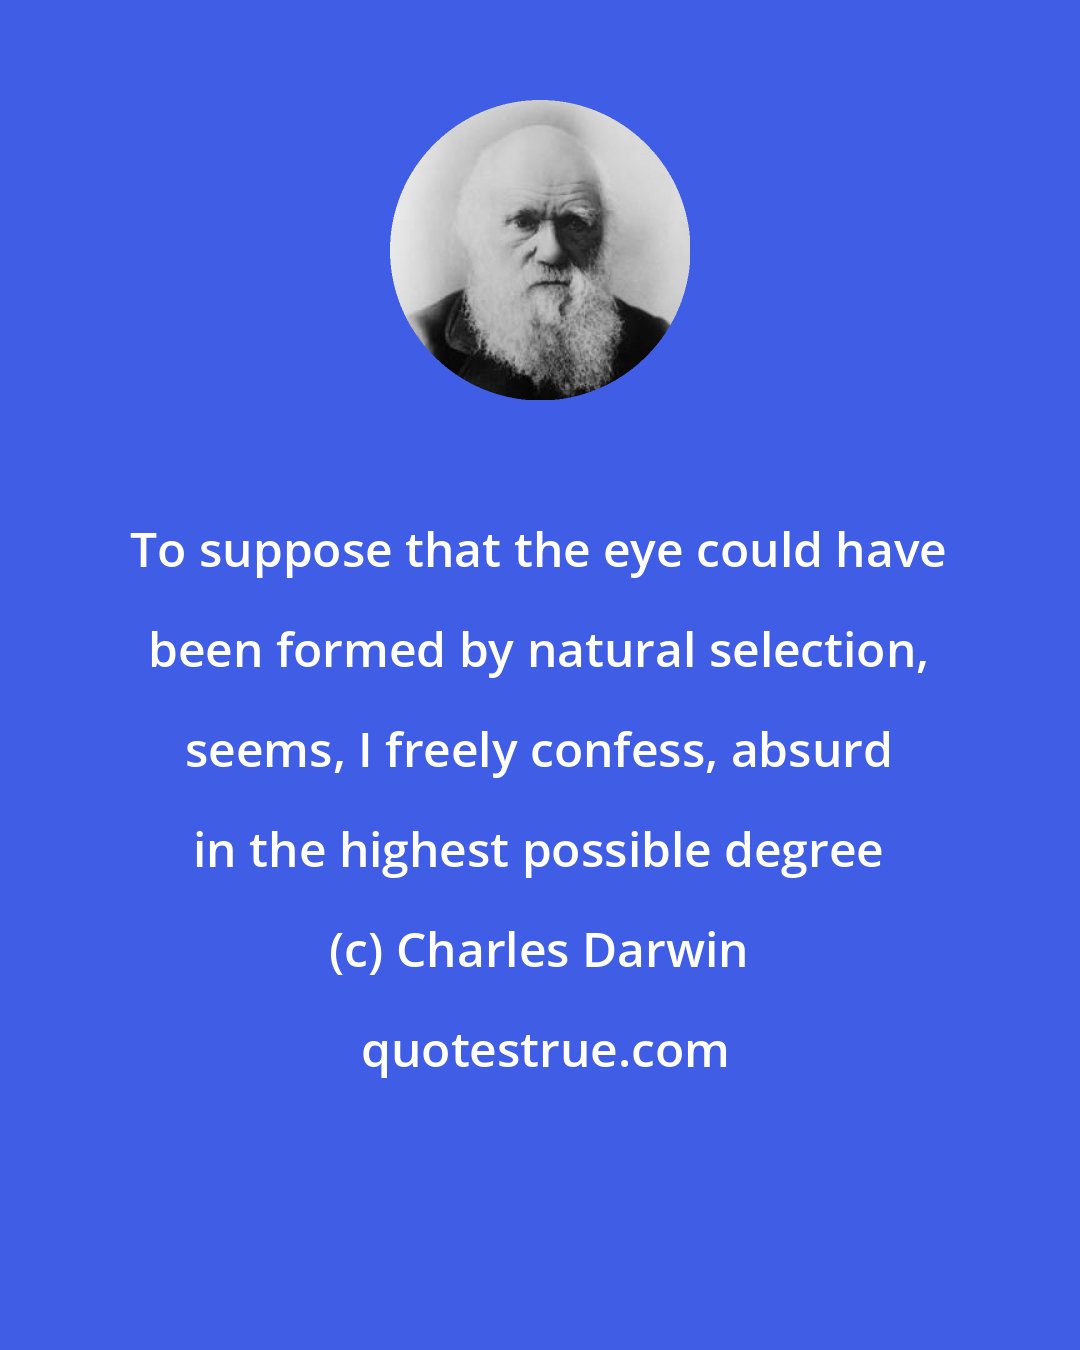 Charles Darwin: To suppose that the eye could have been formed by natural selection, seems, I freely confess, absurd in the highest possible degree